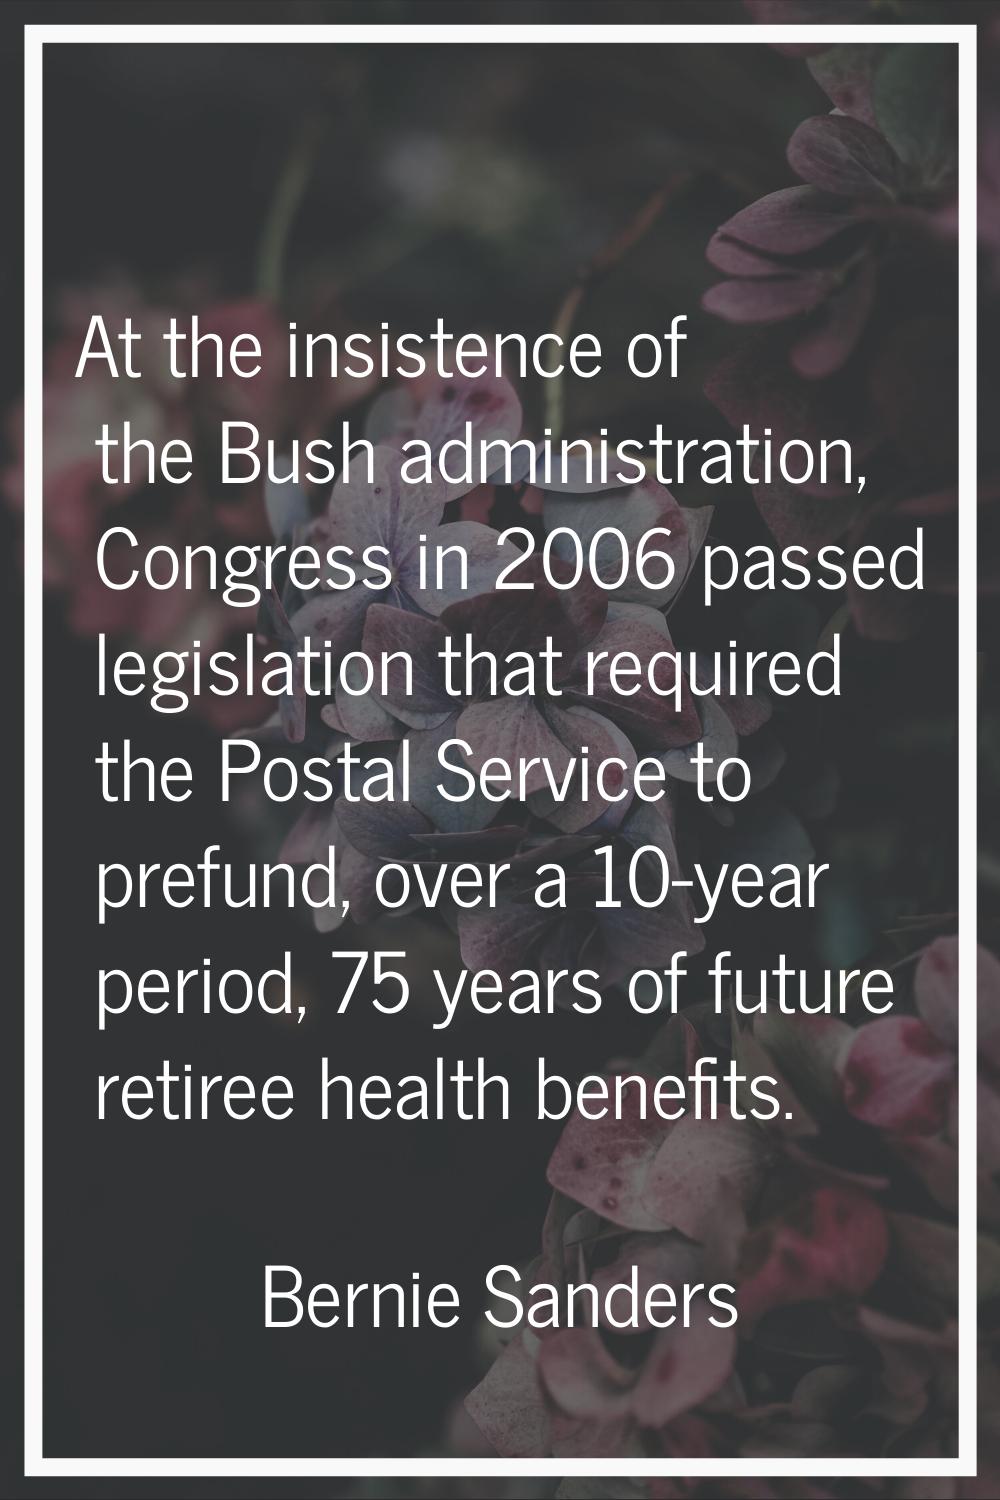 At the insistence of the Bush administration, Congress in 2006 passed legislation that required the